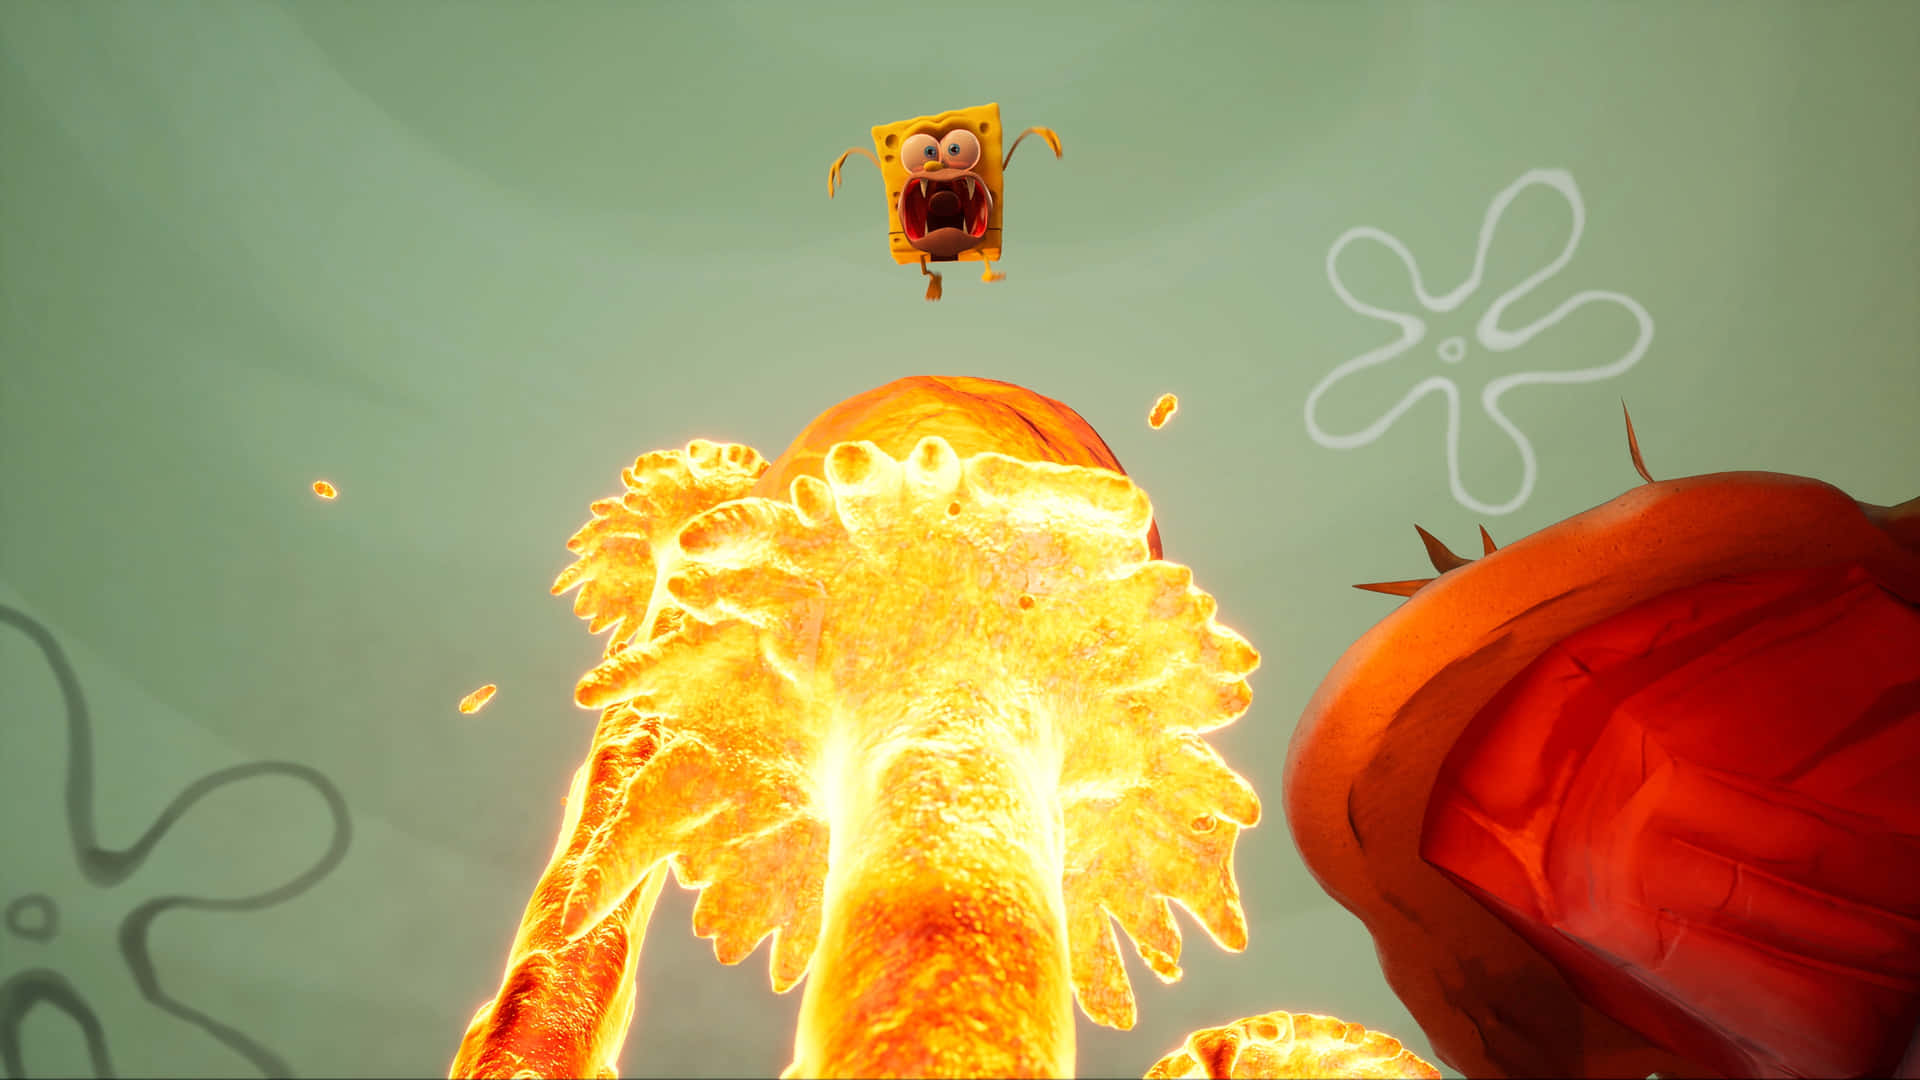 Spongebobpfp Lava Can Be Translated To Spanish As 